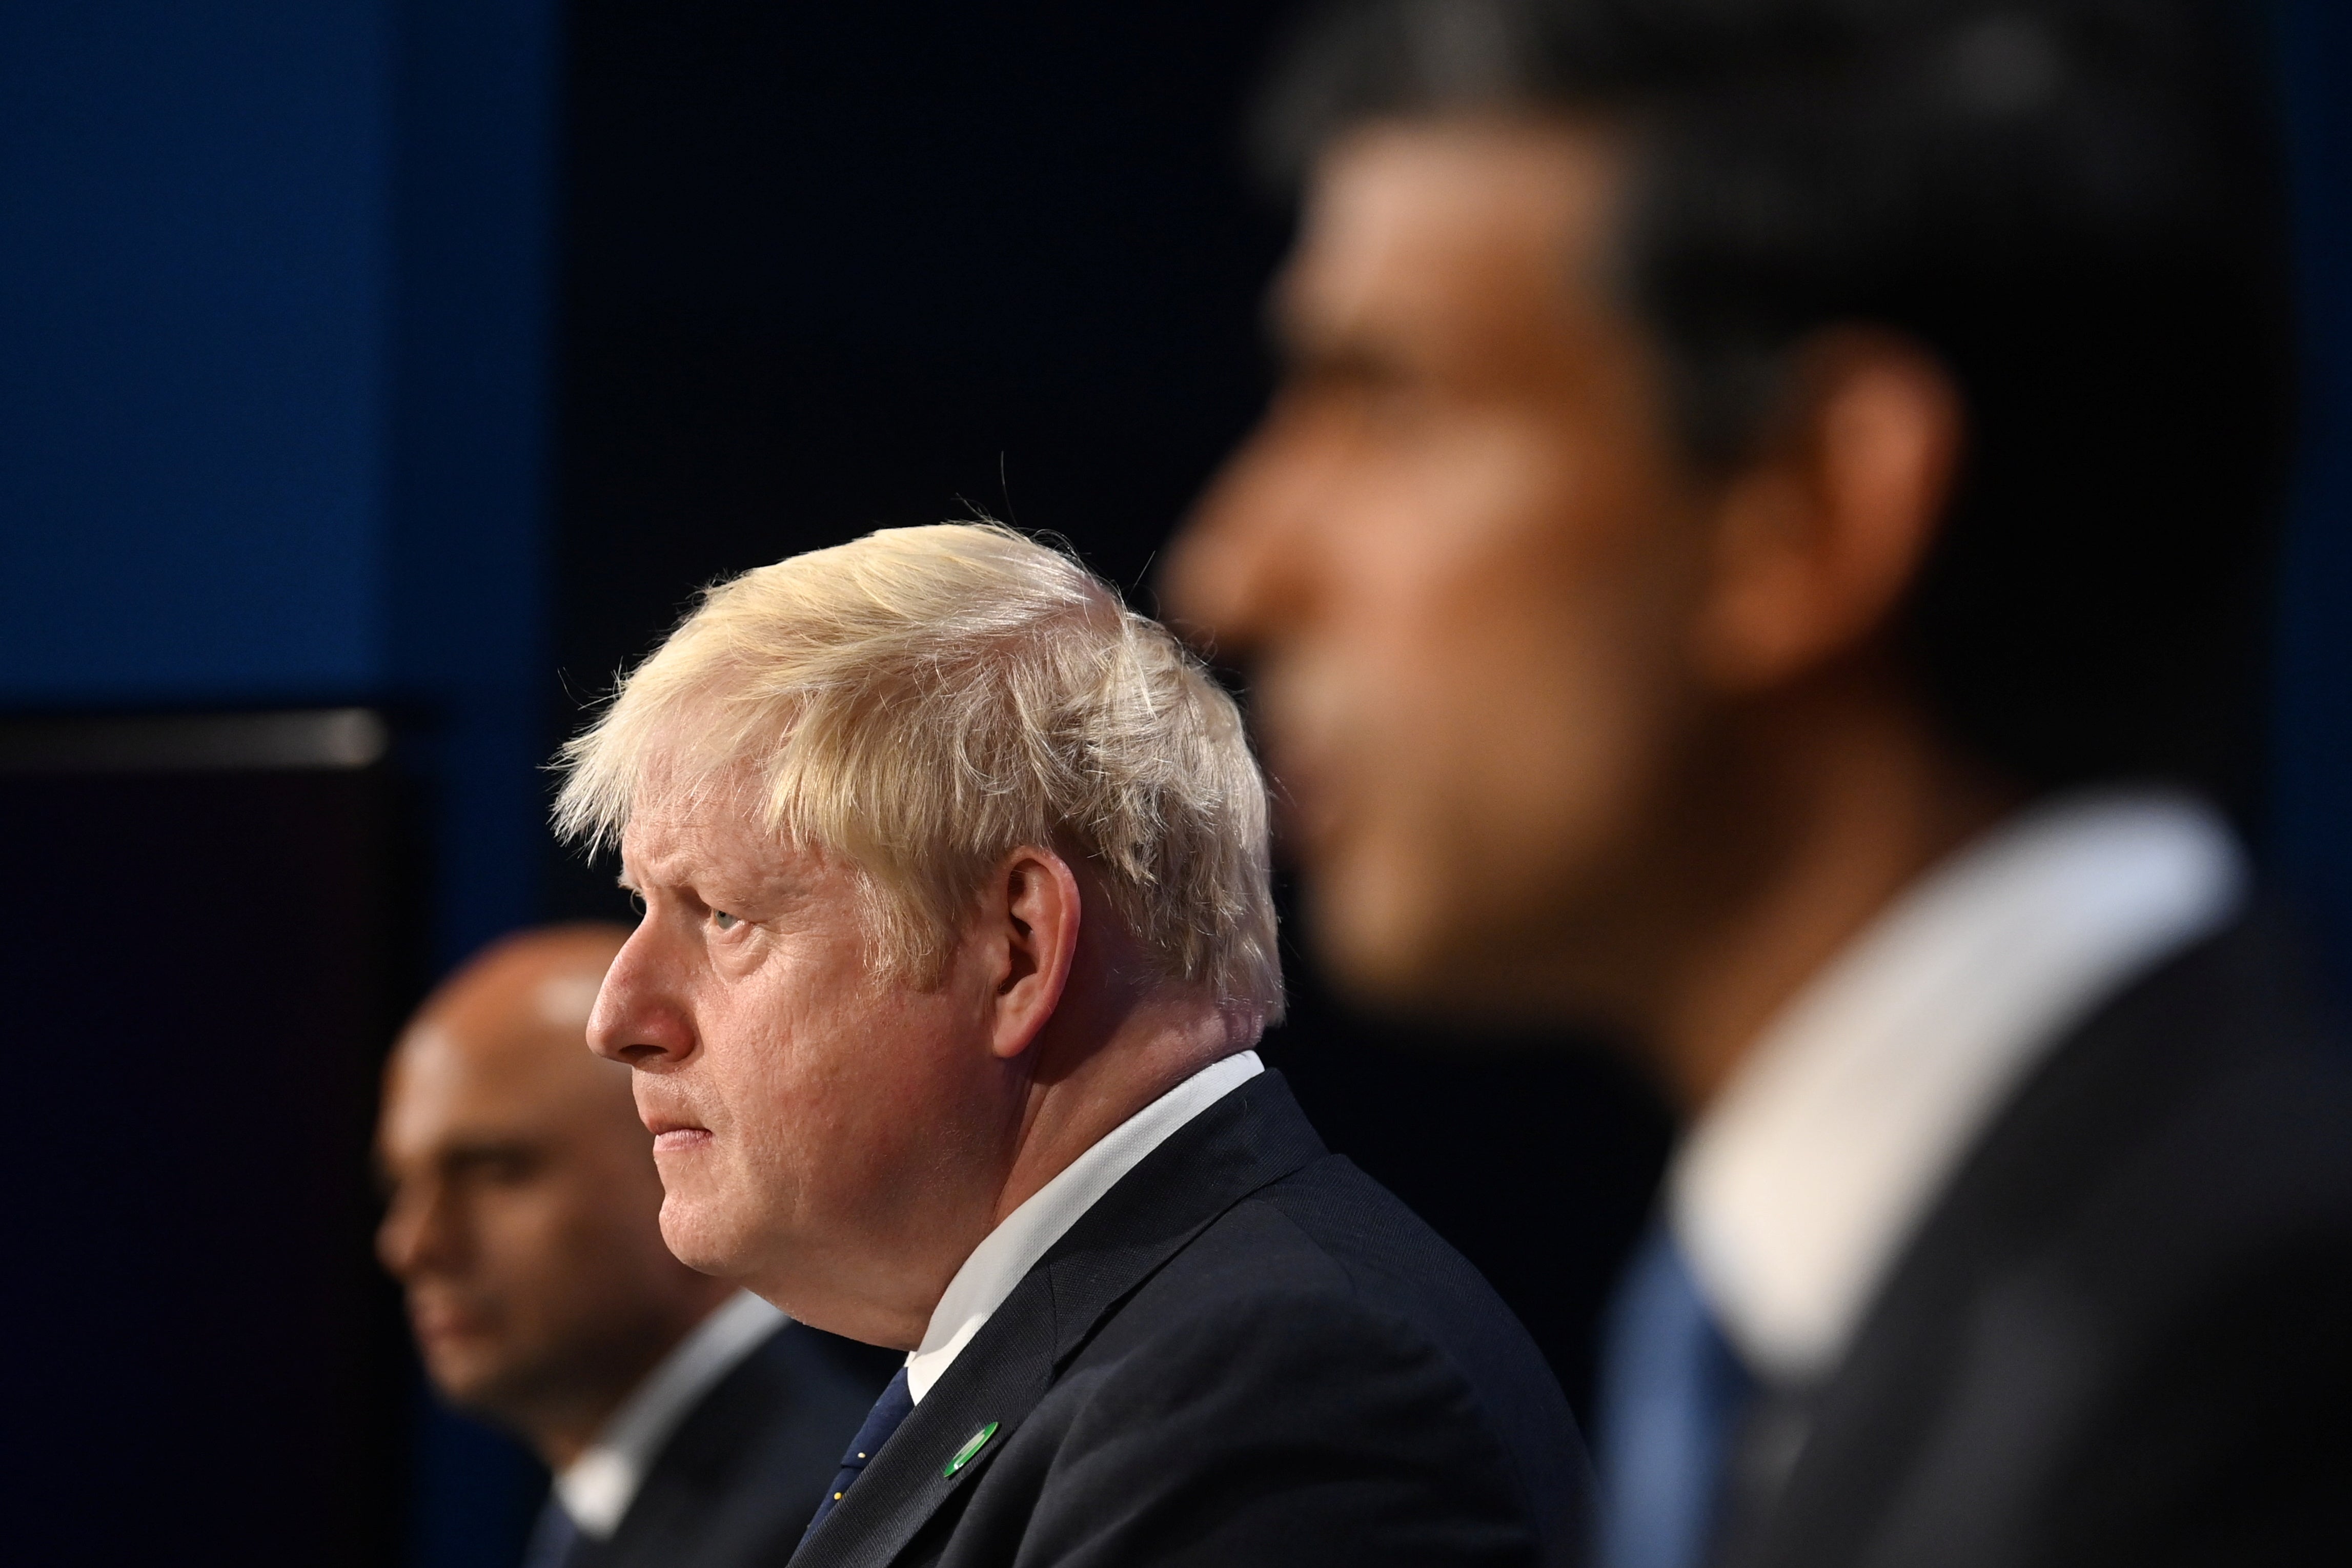 Boris Johnson appeared to take a parting shot at his former chancellor Rishi Sunak by saying a prime minister should not always listen to the Treasury (Toby Melville/PA)